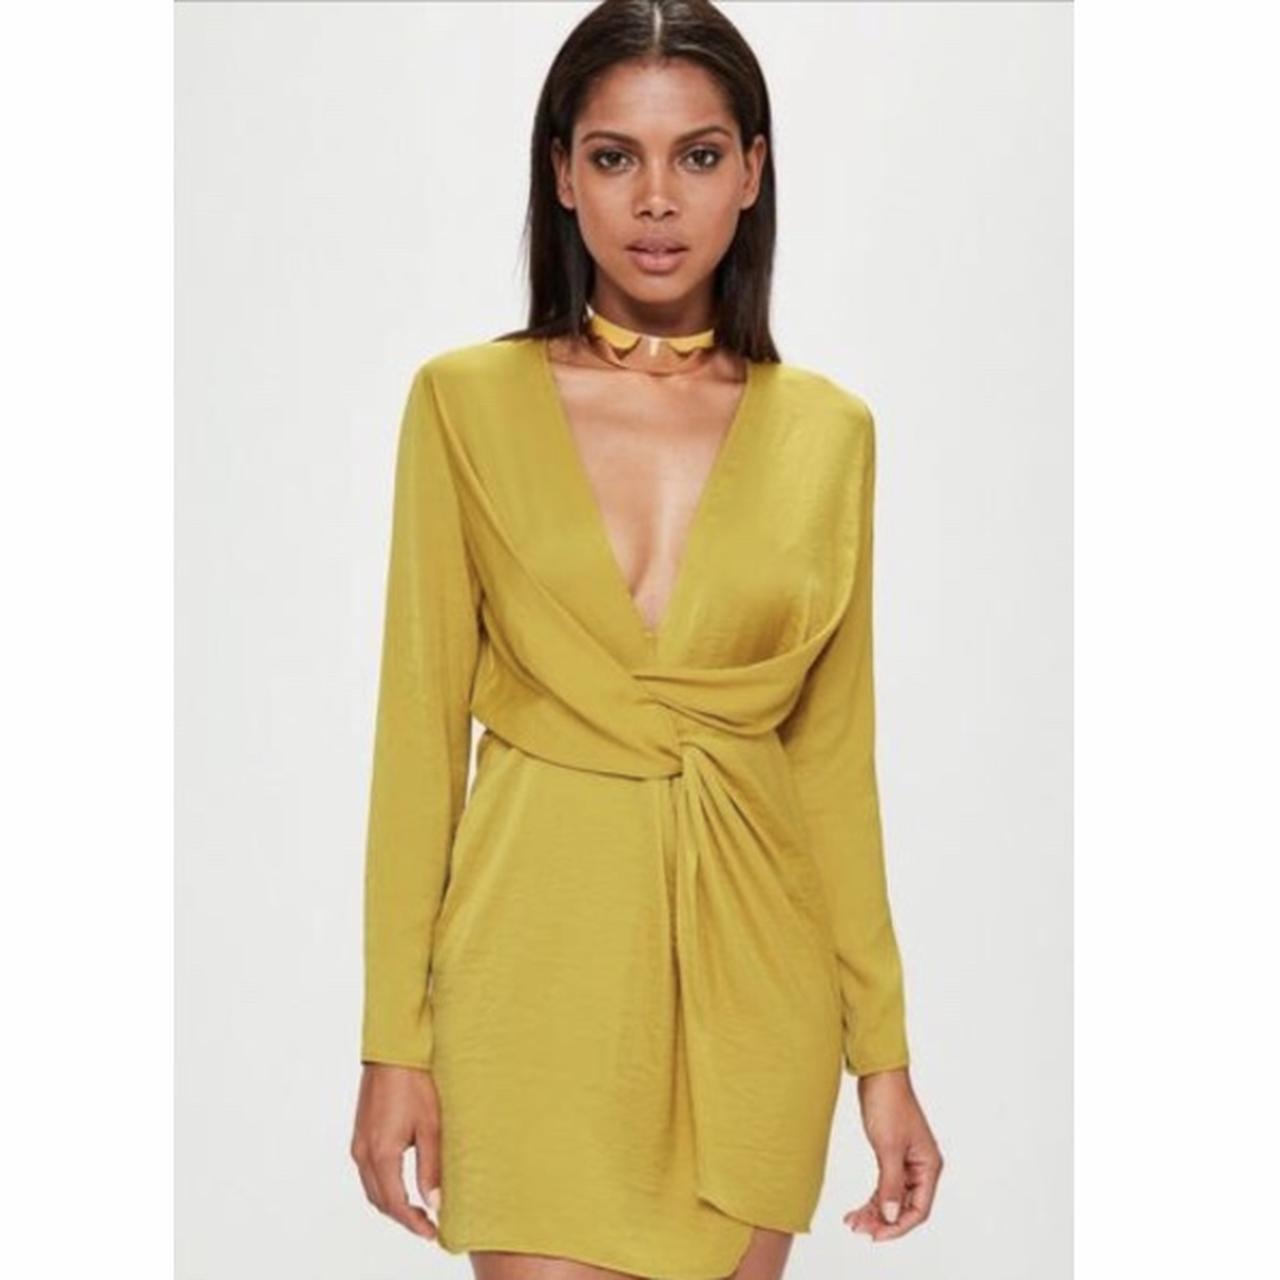 Missguided satin dress in a gold yellow colour size - Depop